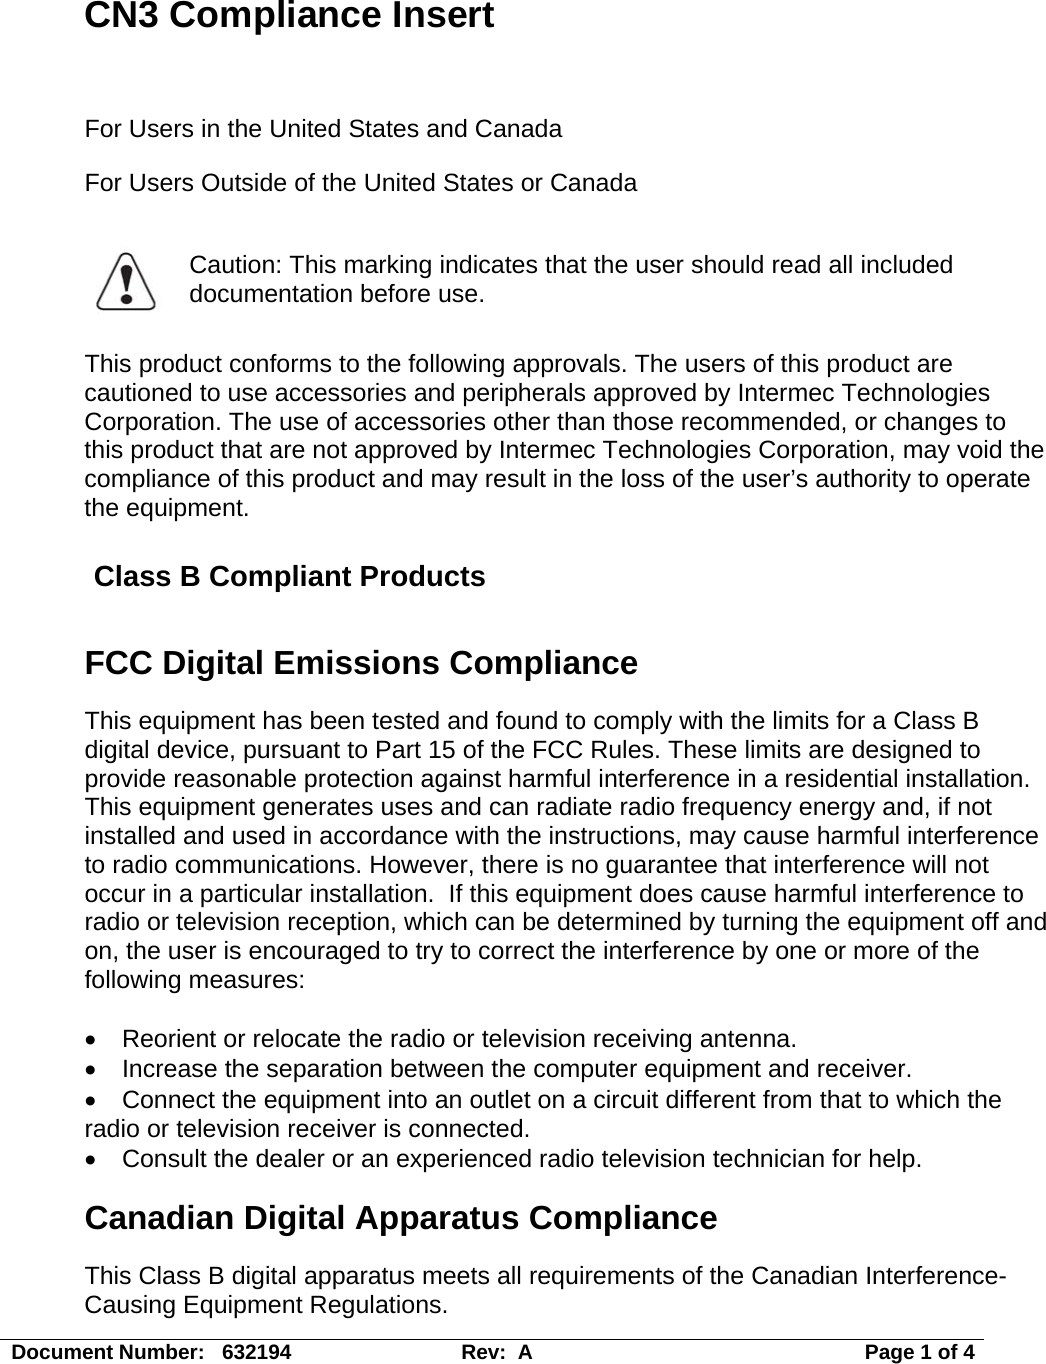 CN3 Compliance Insert  For Users in the United States and Canada For Users Outside of the United States or Canada   Caution: This marking indicates that the user should read all included documentation before use.  This product conforms to the following approvals. The users of this product are cautioned to use accessories and peripherals approved by Intermec Technologies Corporation. The use of accessories other than those recommended, or changes to this product that are not approved by Intermec Technologies Corporation, may void the compliance of this product and may result in the loss of the user’s authority to operate the equipment. Class B Compliant Products FCC Digital Emissions Compliance   This equipment has been tested and found to comply with the limits for a Class B digital device, pursuant to Part 15 of the FCC Rules. These limits are designed to provide reasonable protection against harmful interference in a residential installation.  This equipment generates uses and can radiate radio frequency energy and, if not installed and used in accordance with the instructions, may cause harmful interference to radio communications. However, there is no guarantee that interference will not occur in a particular installation.  If this equipment does cause harmful interference to radio or television reception, which can be determined by turning the equipment off and on, the user is encouraged to try to correct the interference by one or more of the following measures:  •  Reorient or relocate the radio or television receiving antenna. •  Increase the separation between the computer equipment and receiver. •  Connect the equipment into an outlet on a circuit different from that to which the radio or television receiver is connected. •  Consult the dealer or an experienced radio television technician for help. Canadian Digital Apparatus Compliance This Class B digital apparatus meets all requirements of the Canadian Interference-Causing Equipment Regulations.  Document Number:   632194  Rev:  A   Page 1 of 4 